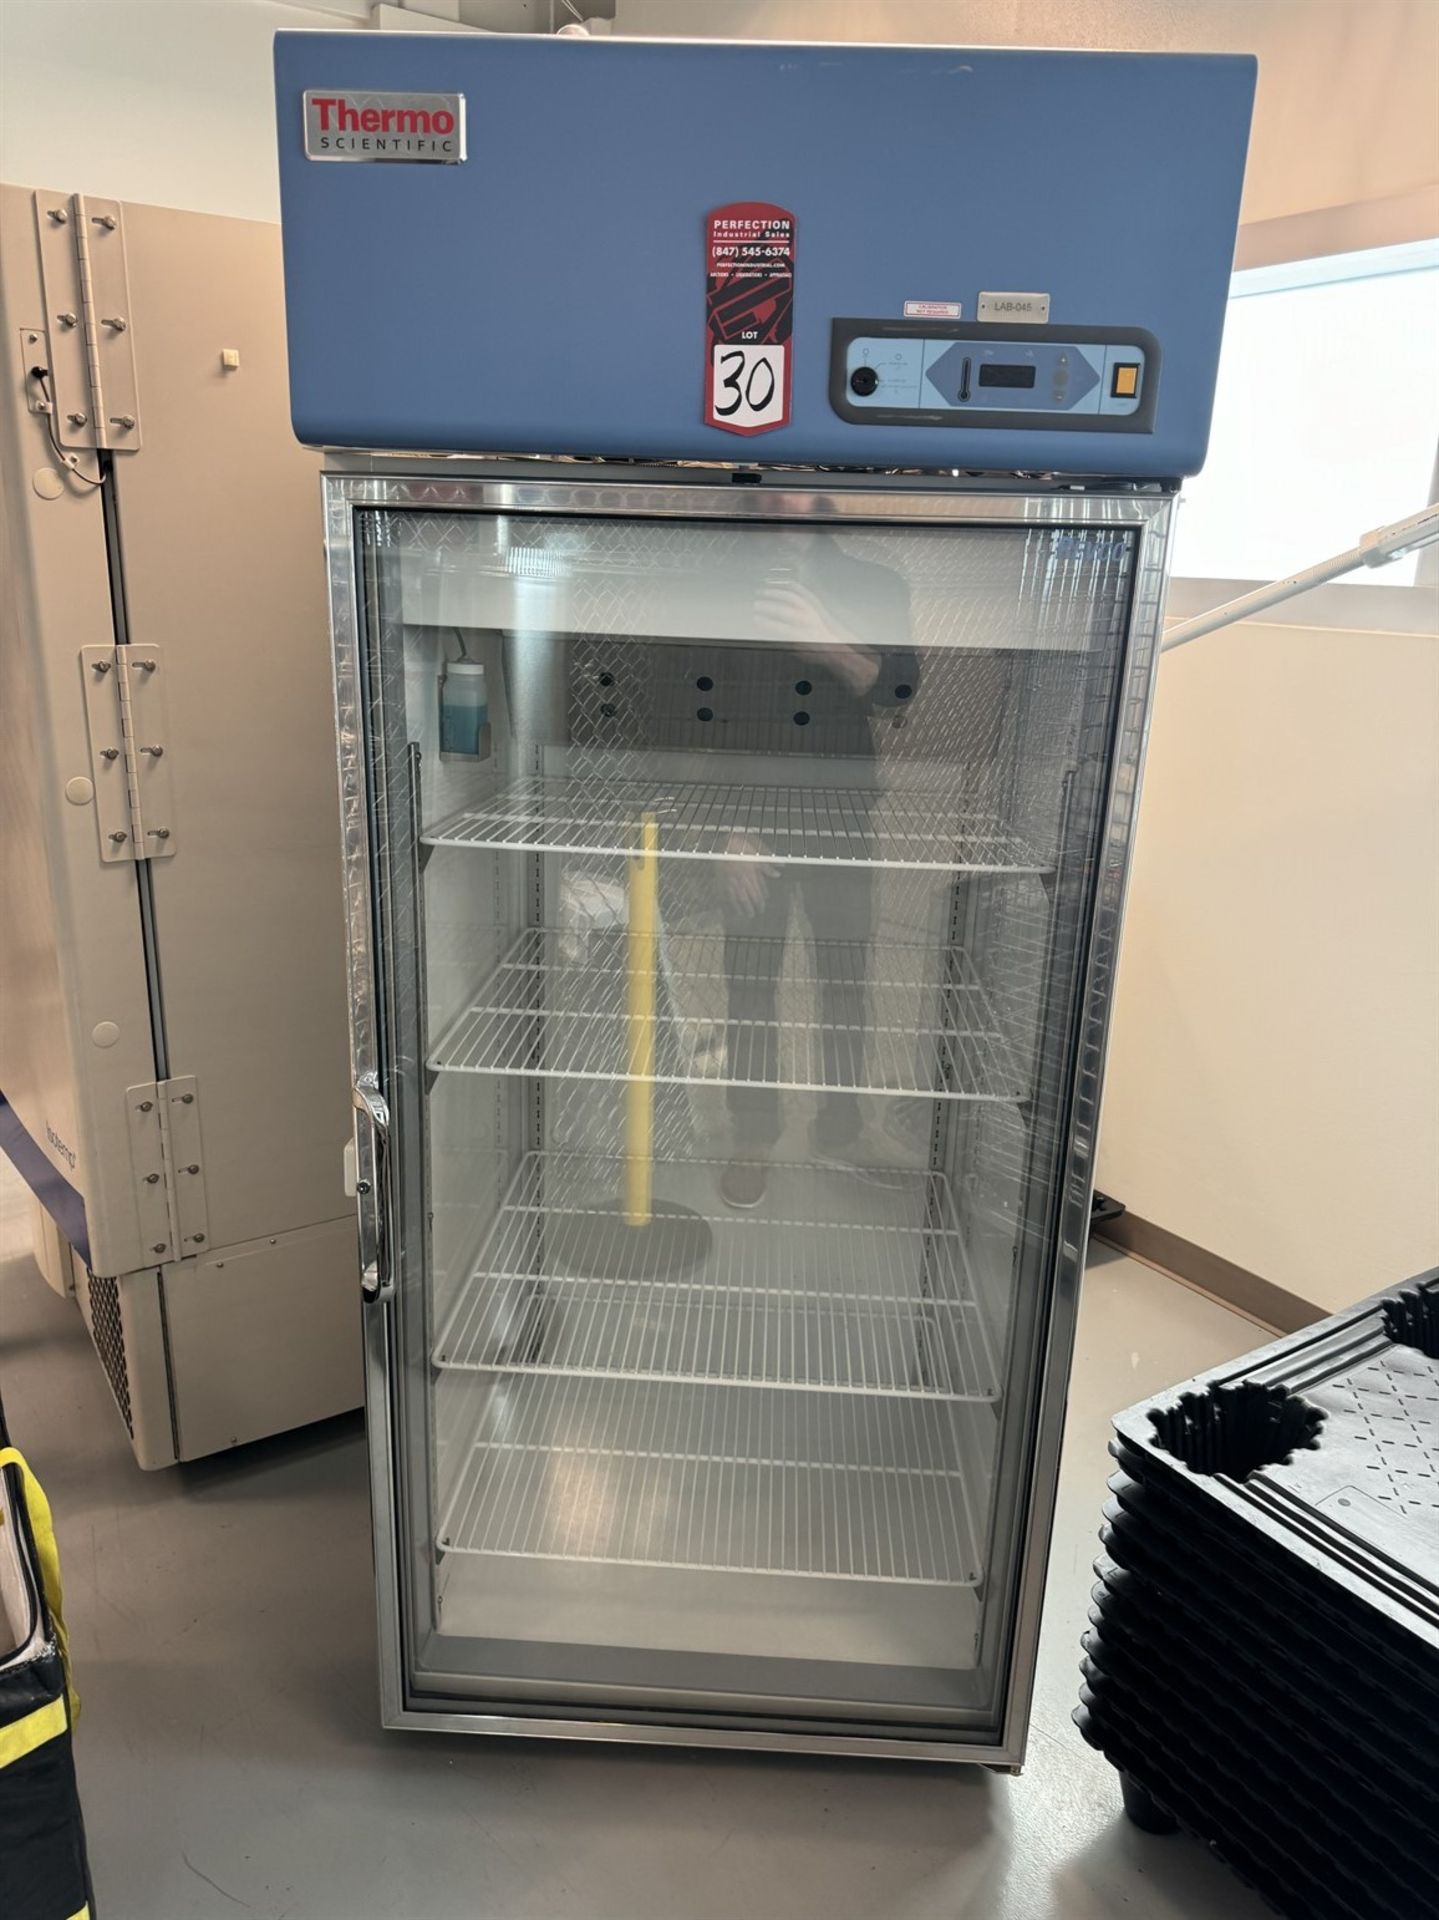 THERMO FISHER SCIENTIFIC RGL3004A Lab Refrigerator, s/n 0153131901150107 - Image 2 of 6